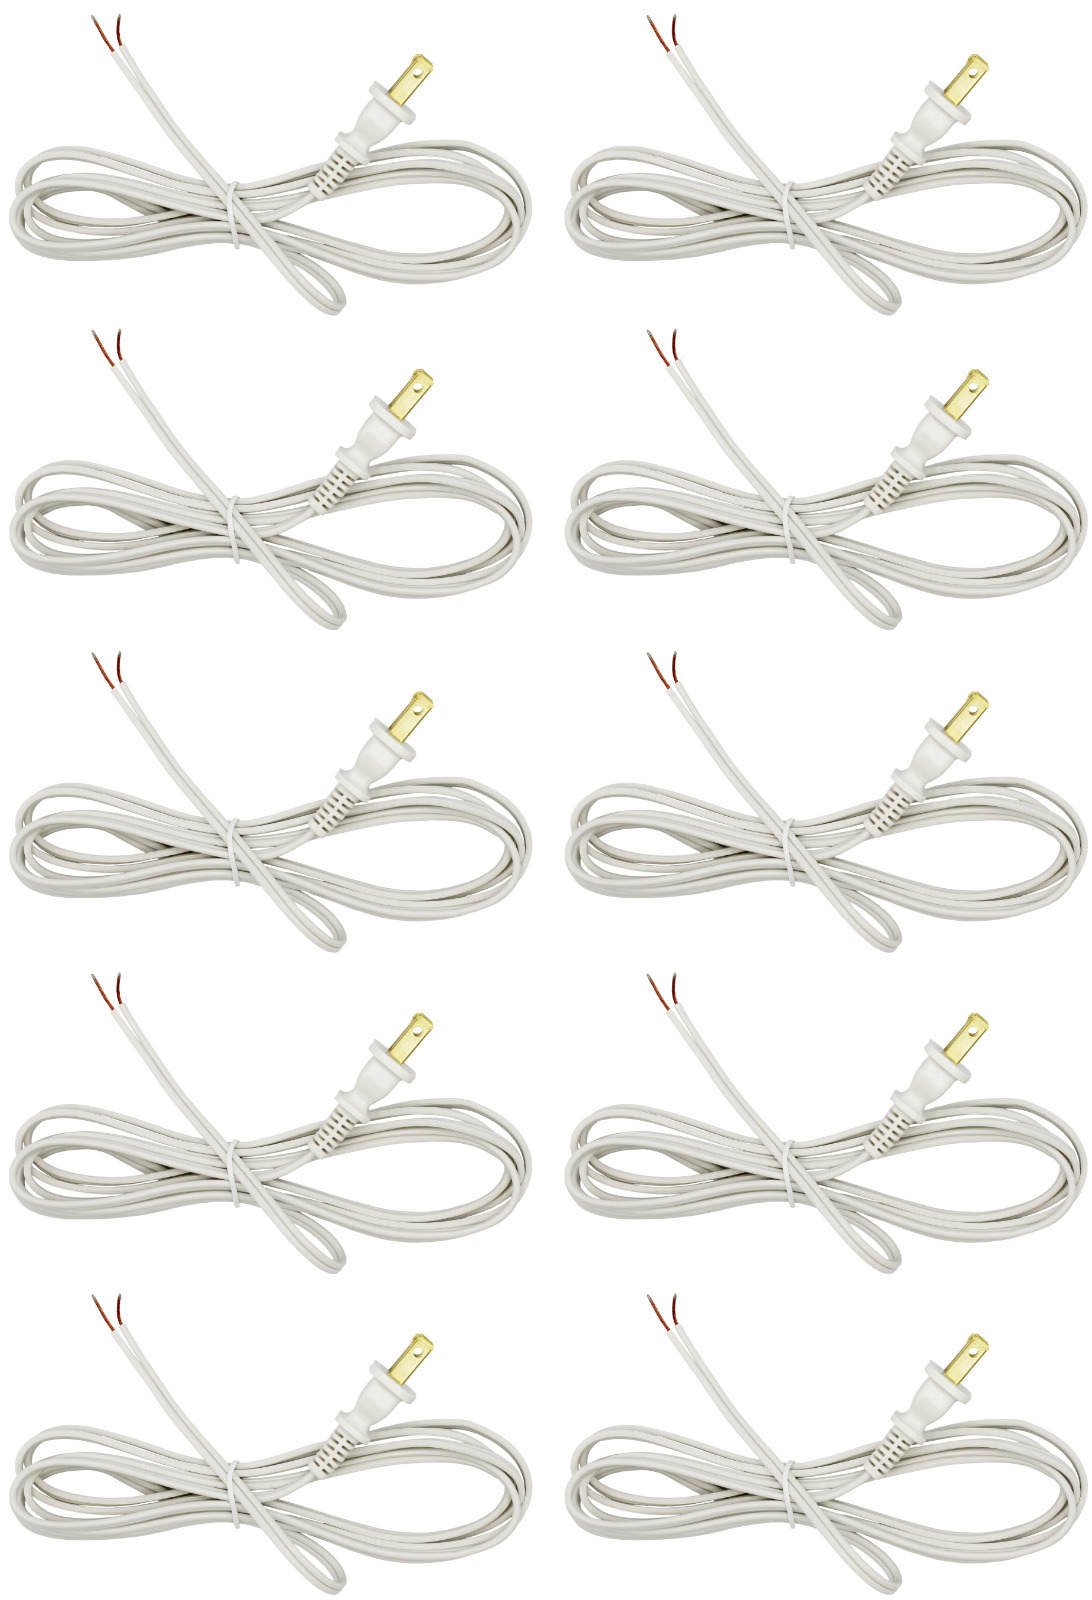 White Lamp Cord, 12 Foot Long Replacement Repair Part, 18/2 SPT-1 Wire - 10 Pack